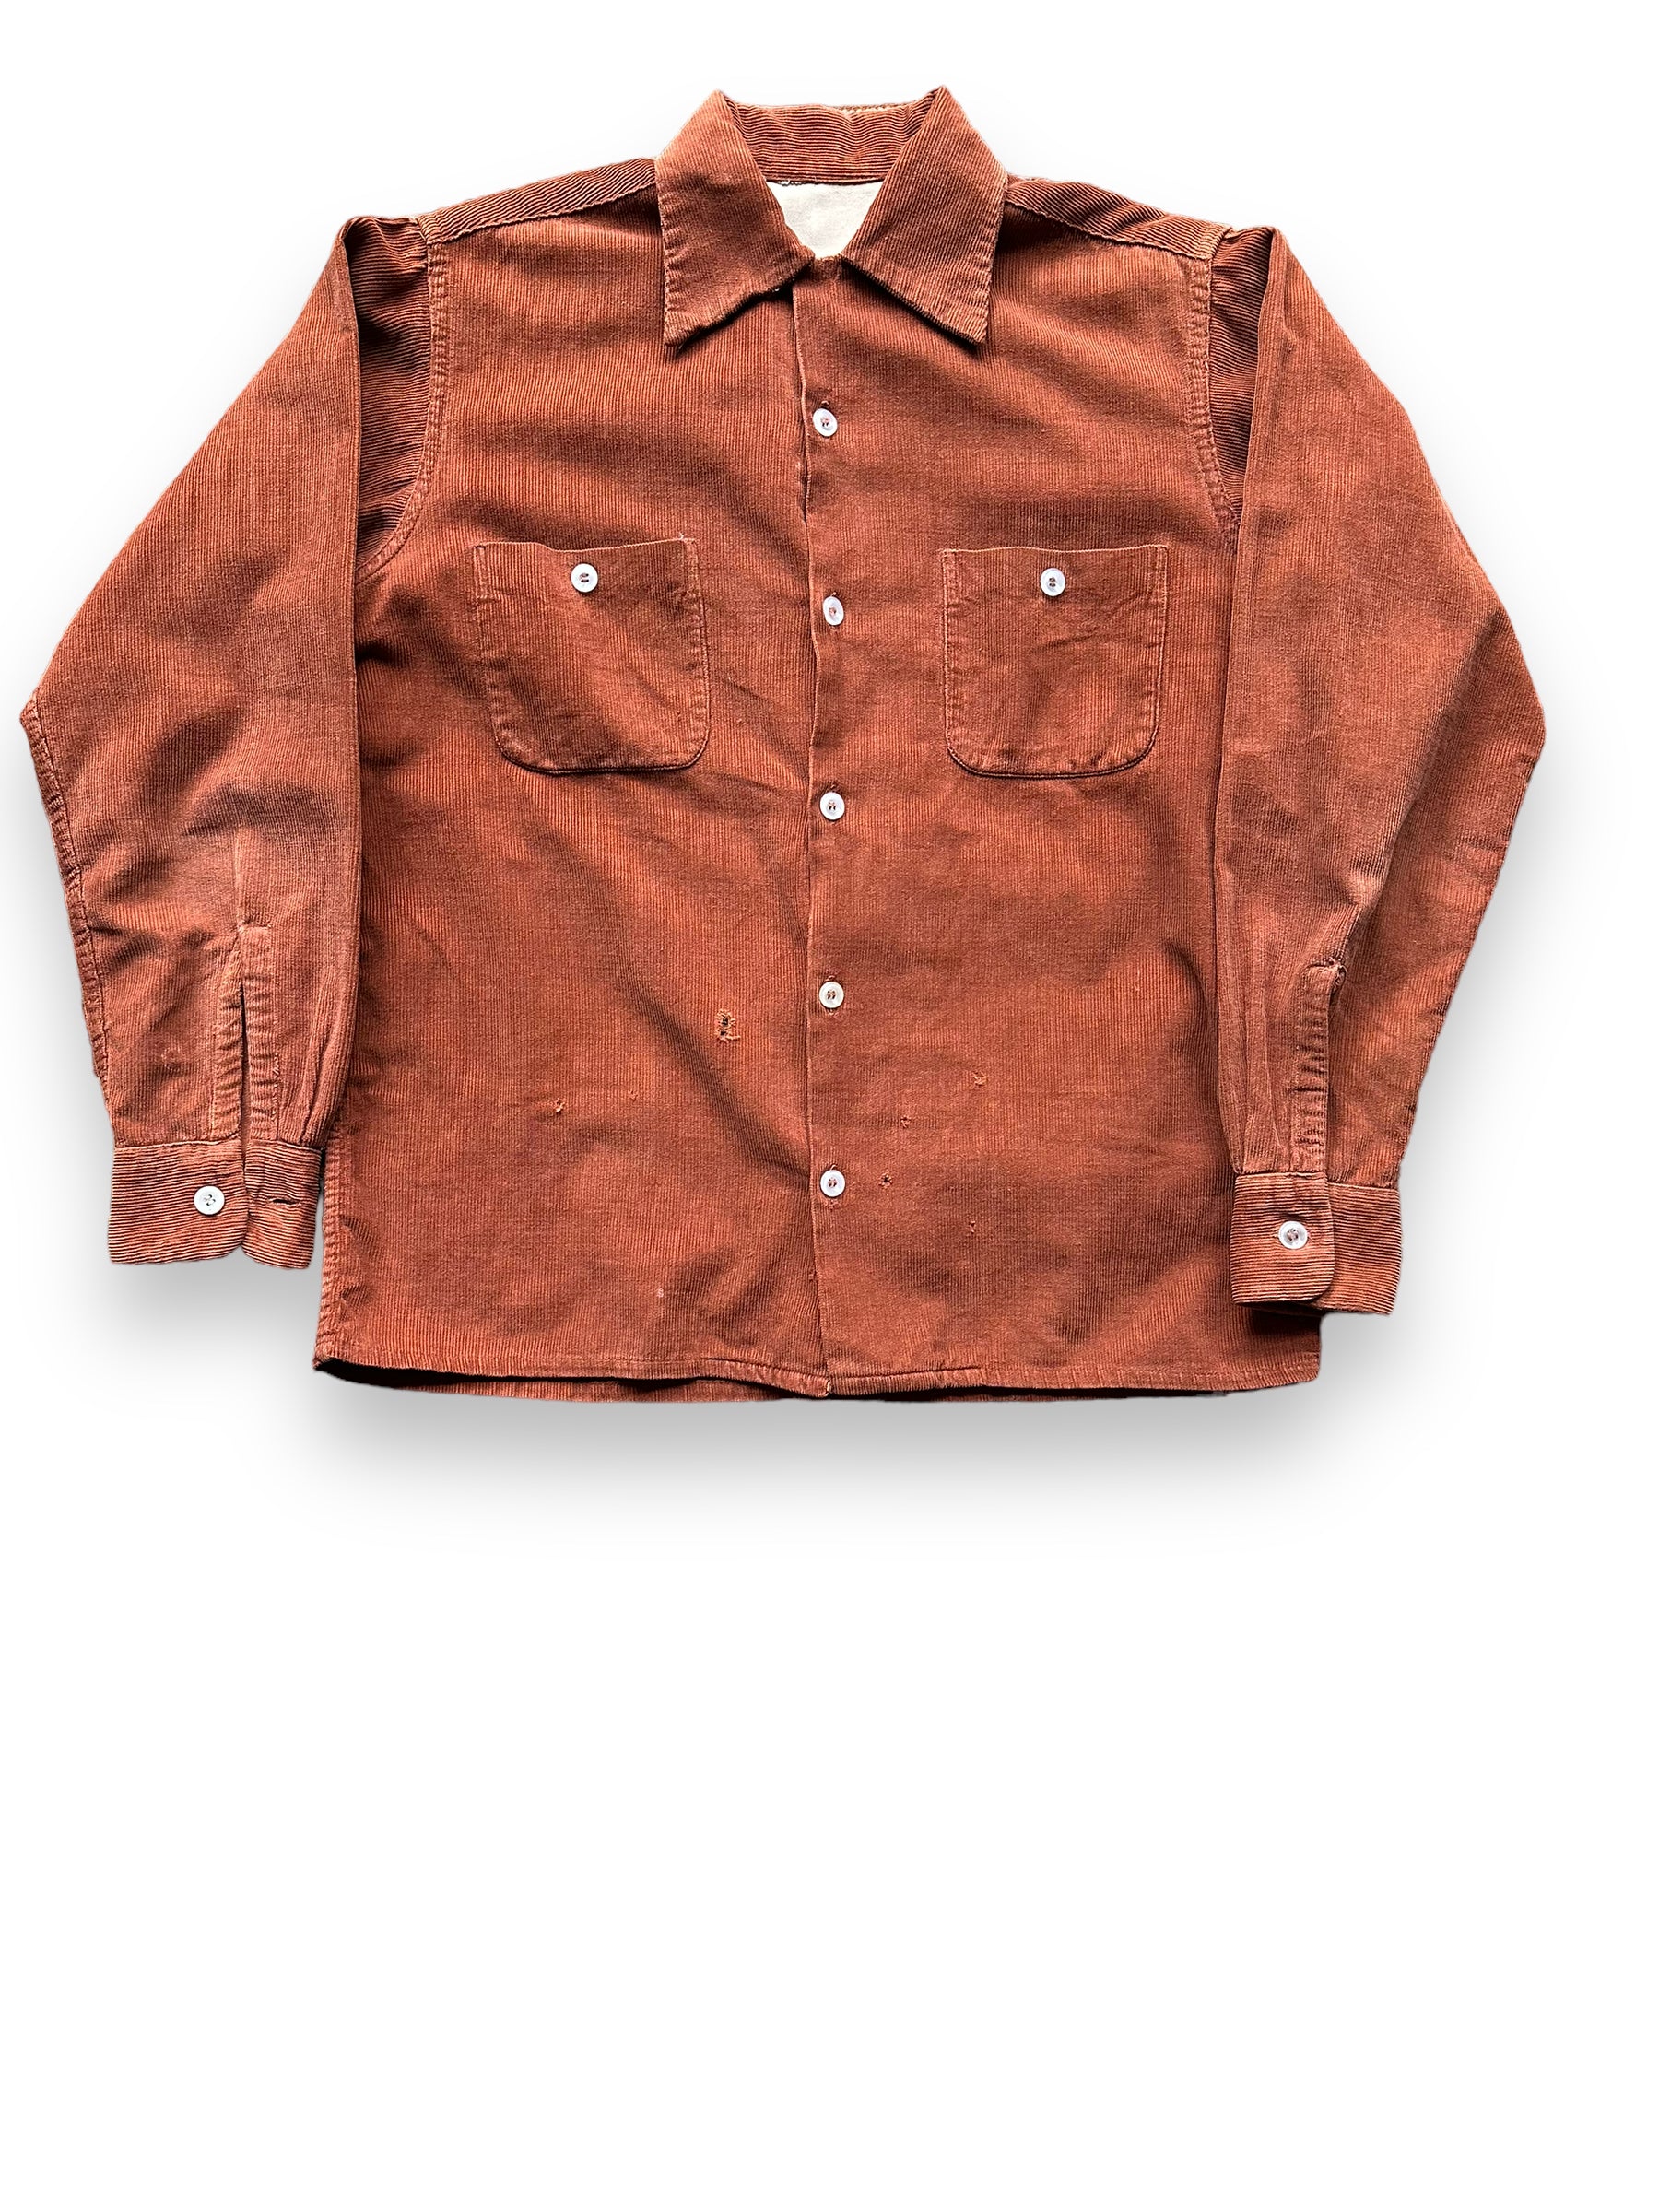 Front View of Vintage Rust Colored Corduroy Loop Collar Shirt  SZ M | Vintage Loop Collar Shirt Seattle | Barn Owl Vintage Seattle